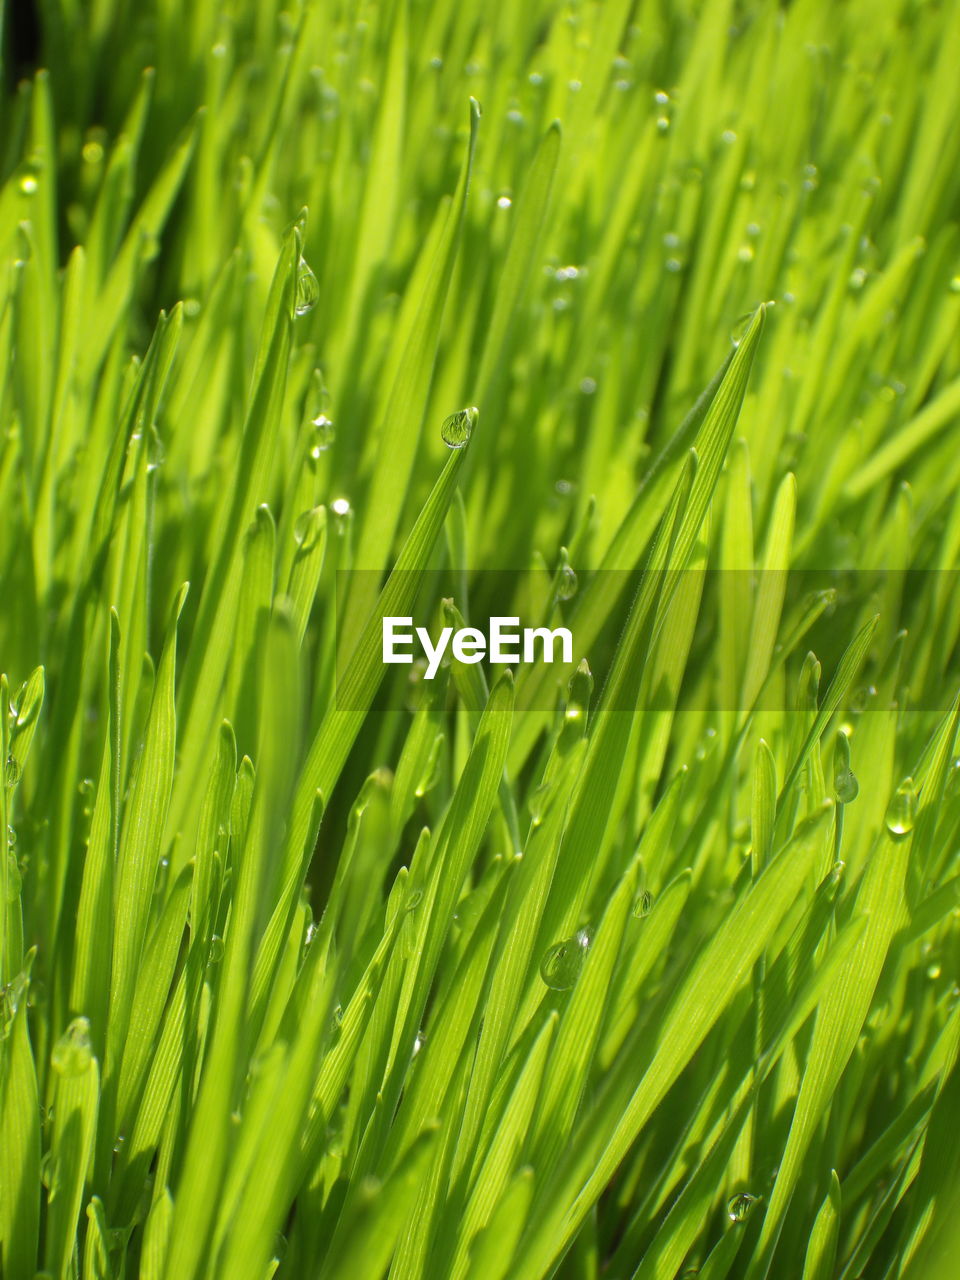 green, plant, growth, nature, grass, backgrounds, lawn, beauty in nature, no people, full frame, wet, drop, water, close-up, wheatgrass, freshness, land, plant stem, grassland, leaf, field, environment, outdoors, day, dew, plant part, agriculture, foliage, selective focus, lush foliage, blade of grass, meadow, rain, crop